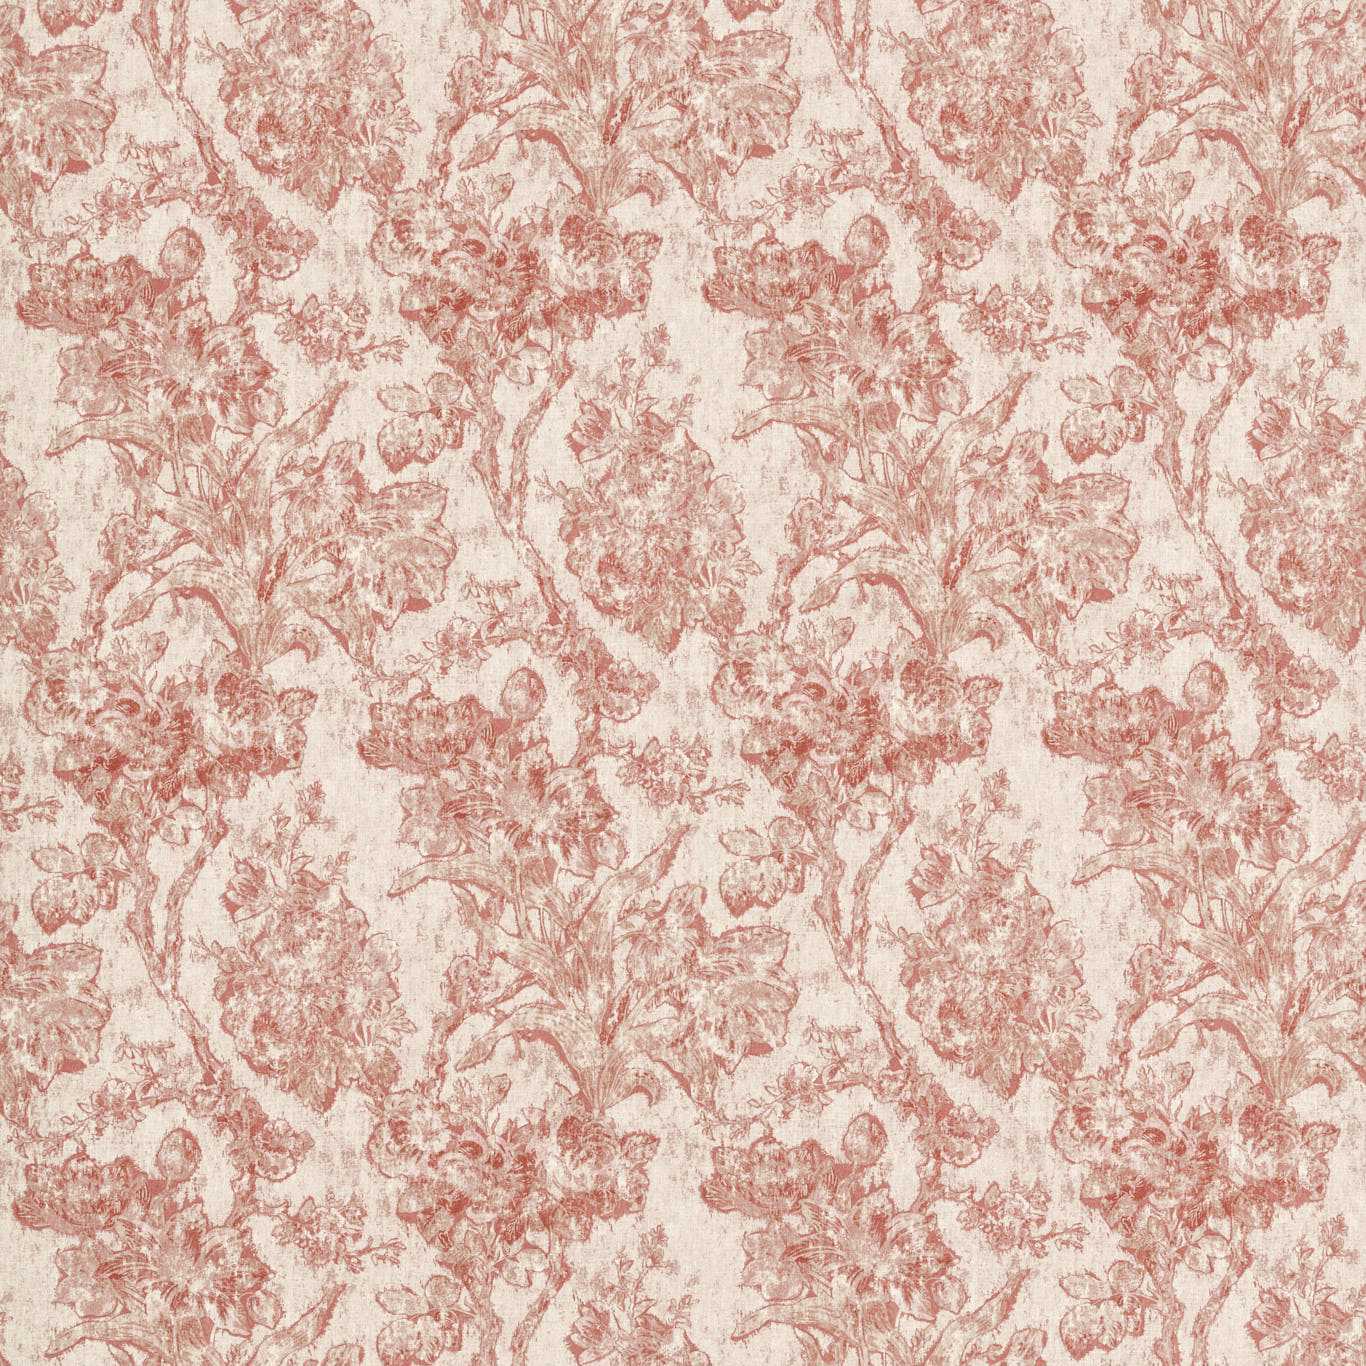 Fringed Tulip Toile Putty Fabric by SAN